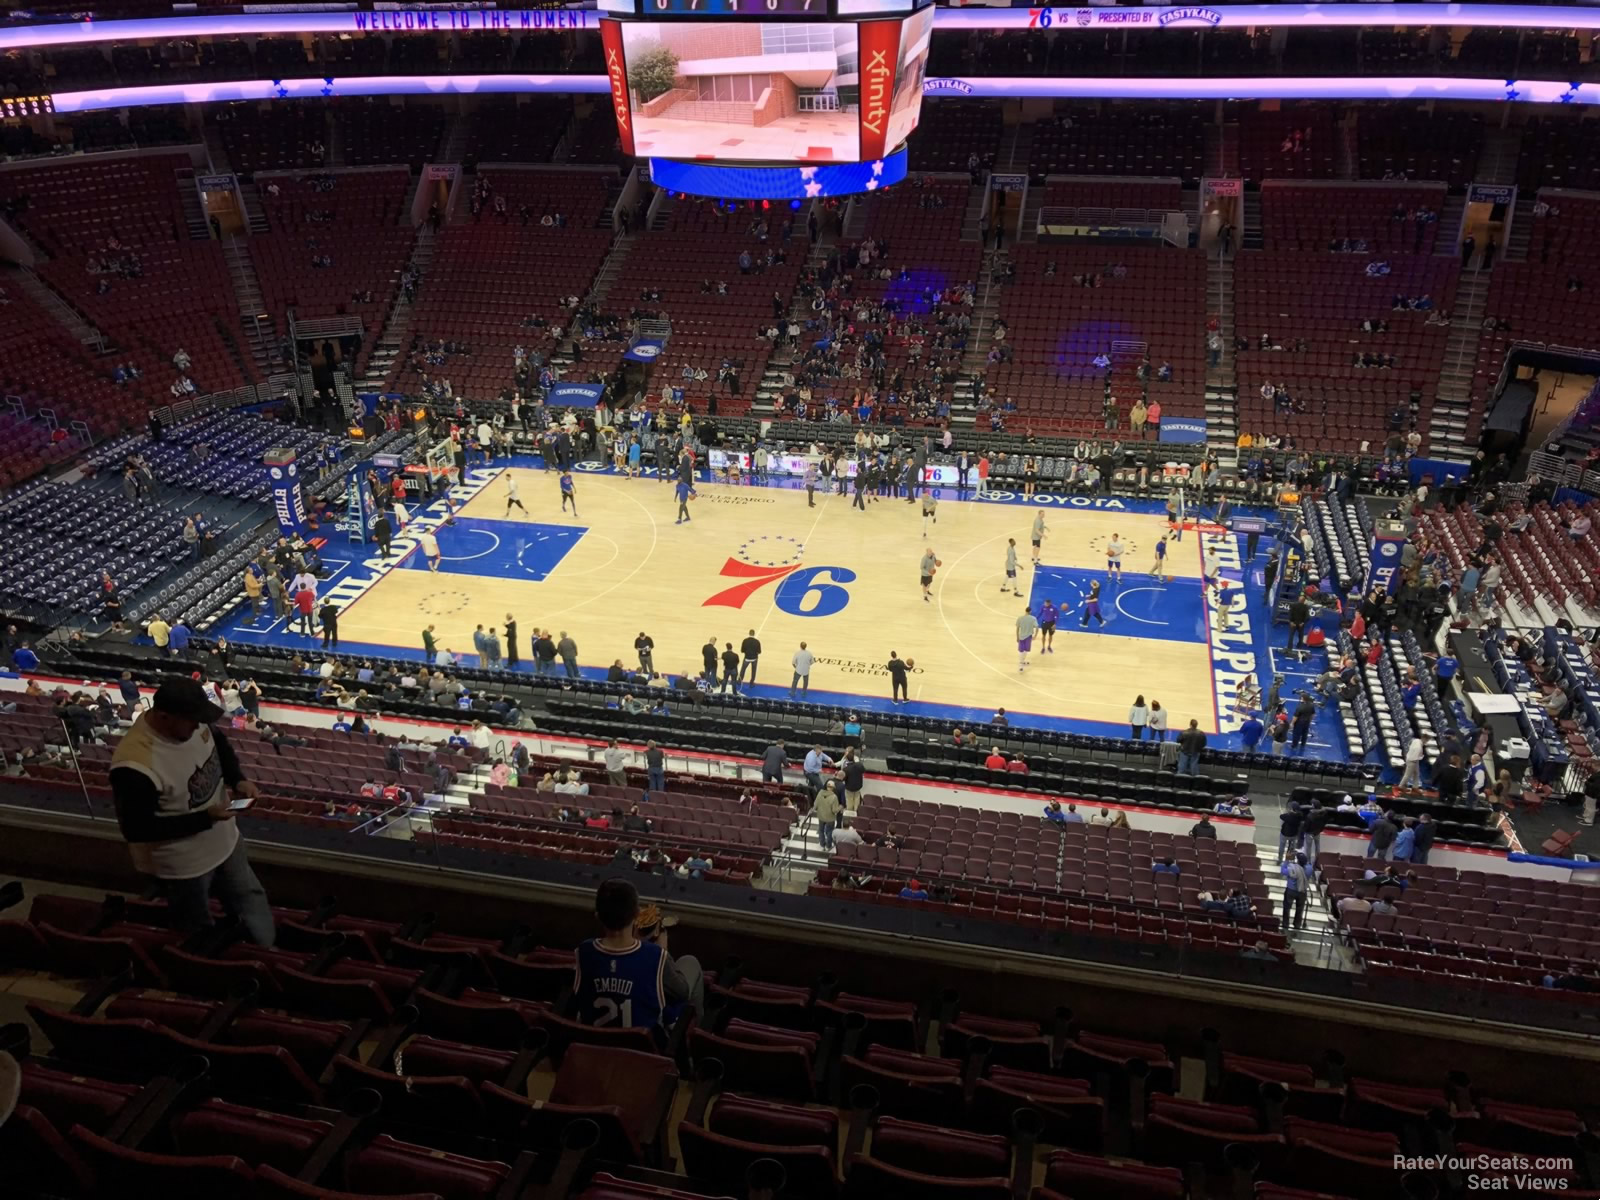 section 214, row 7 seat view  for basketball - wells fargo center